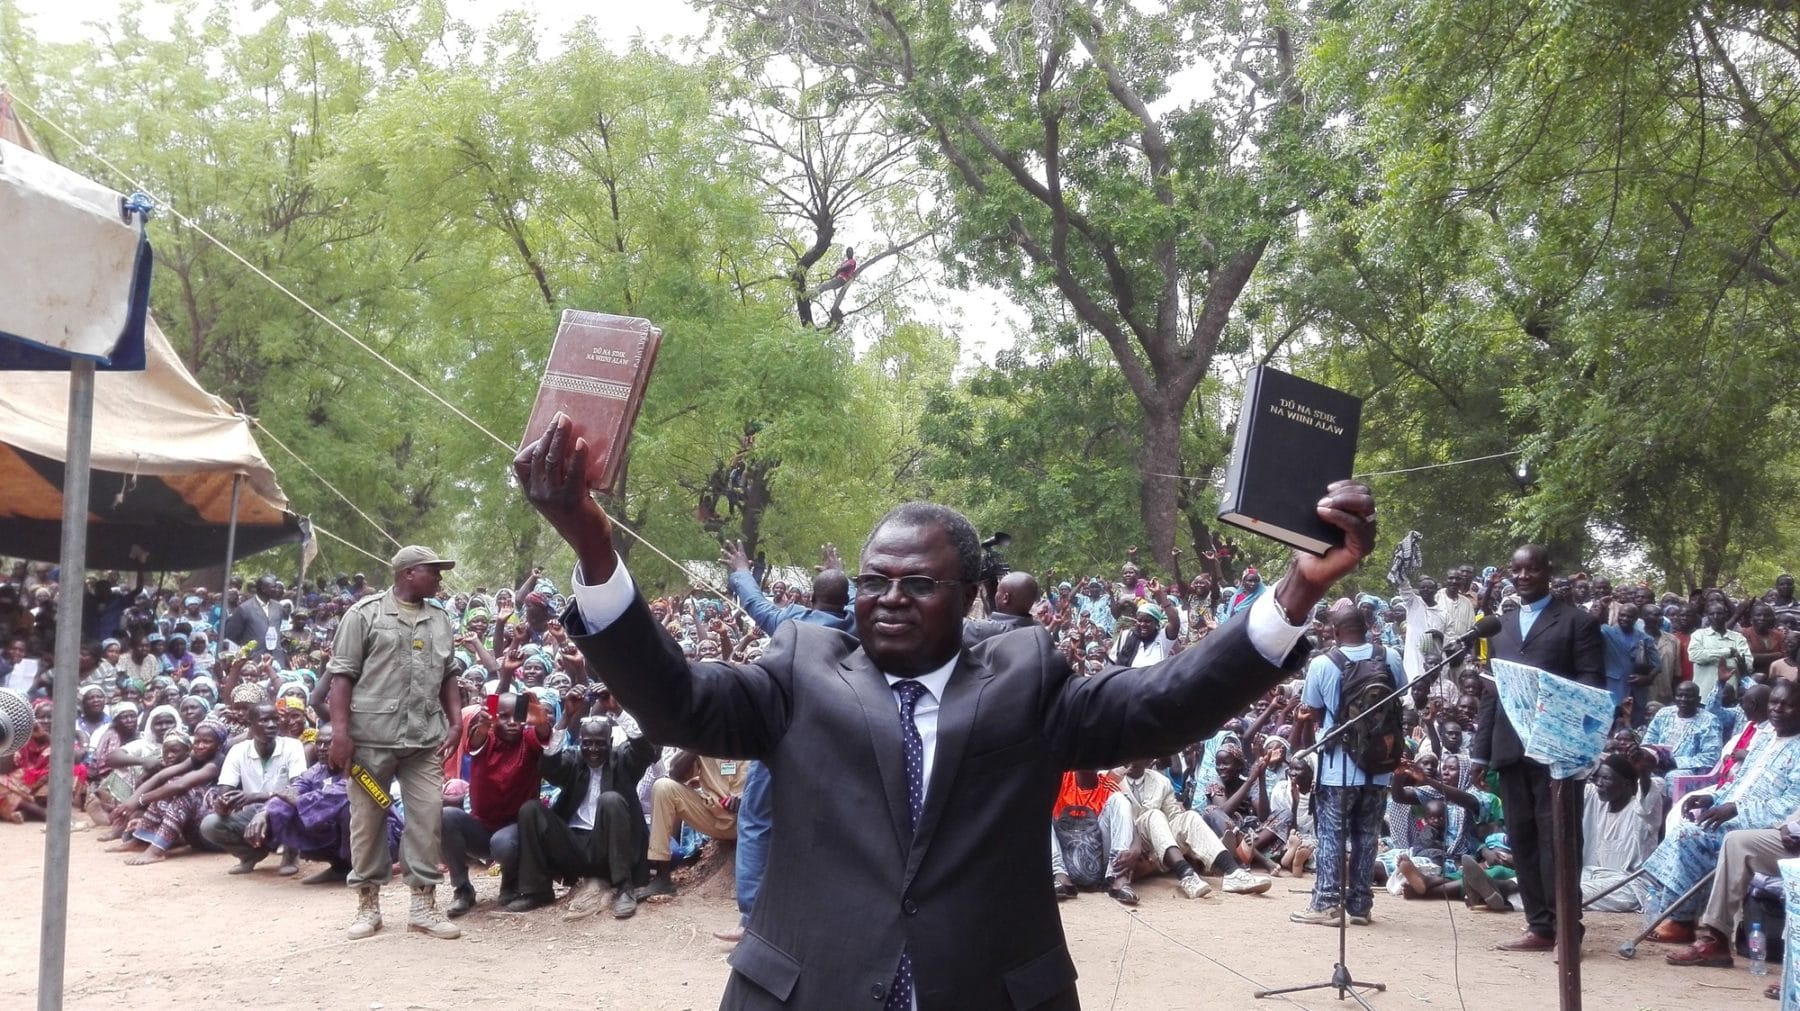 "Here is your Bible!" Bible Society of Cameroon General Secretary Luc Gnowa said to the 5,000 Musgum Christians gathered at the launch of the very first Musgum Bible in the town of Pouss in Cameroon, on May 28, 2016.